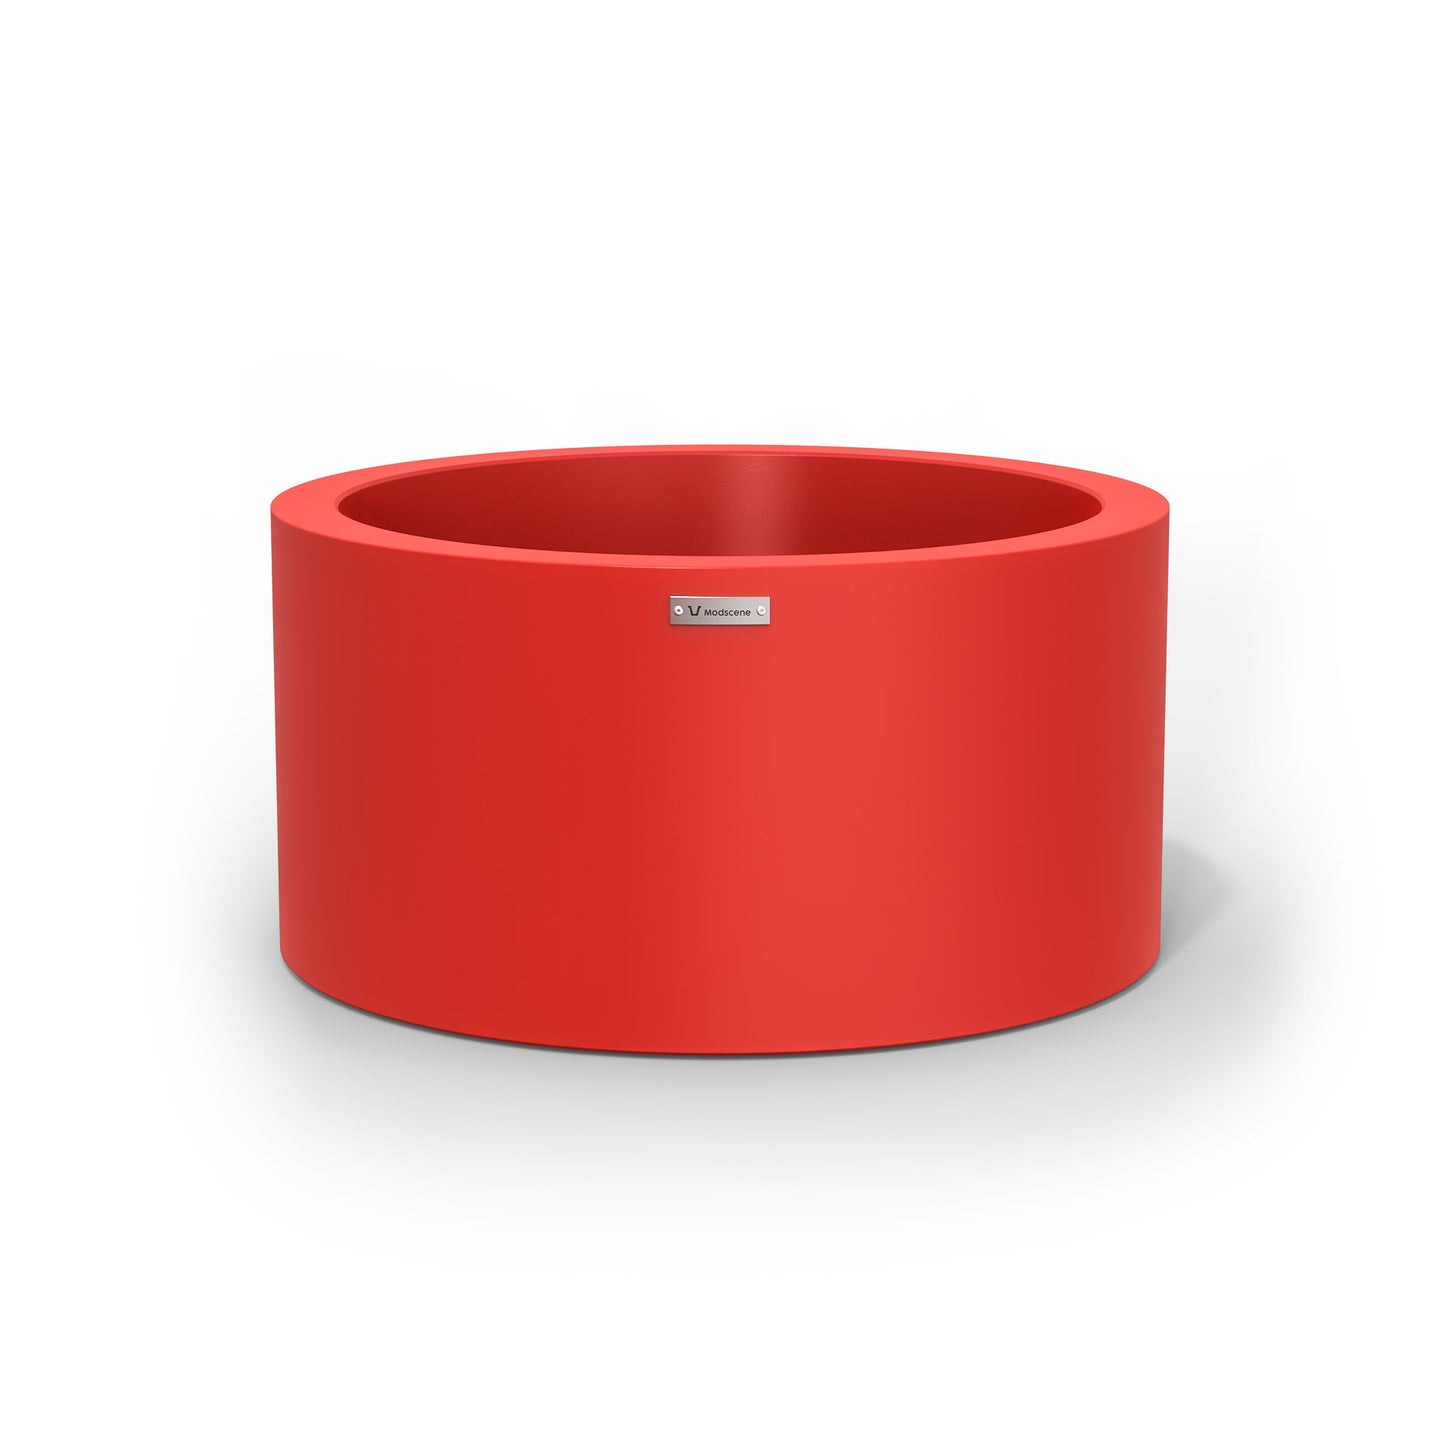 A medium cylinder shaped pot planter in red made by Modscene New Zealand. 